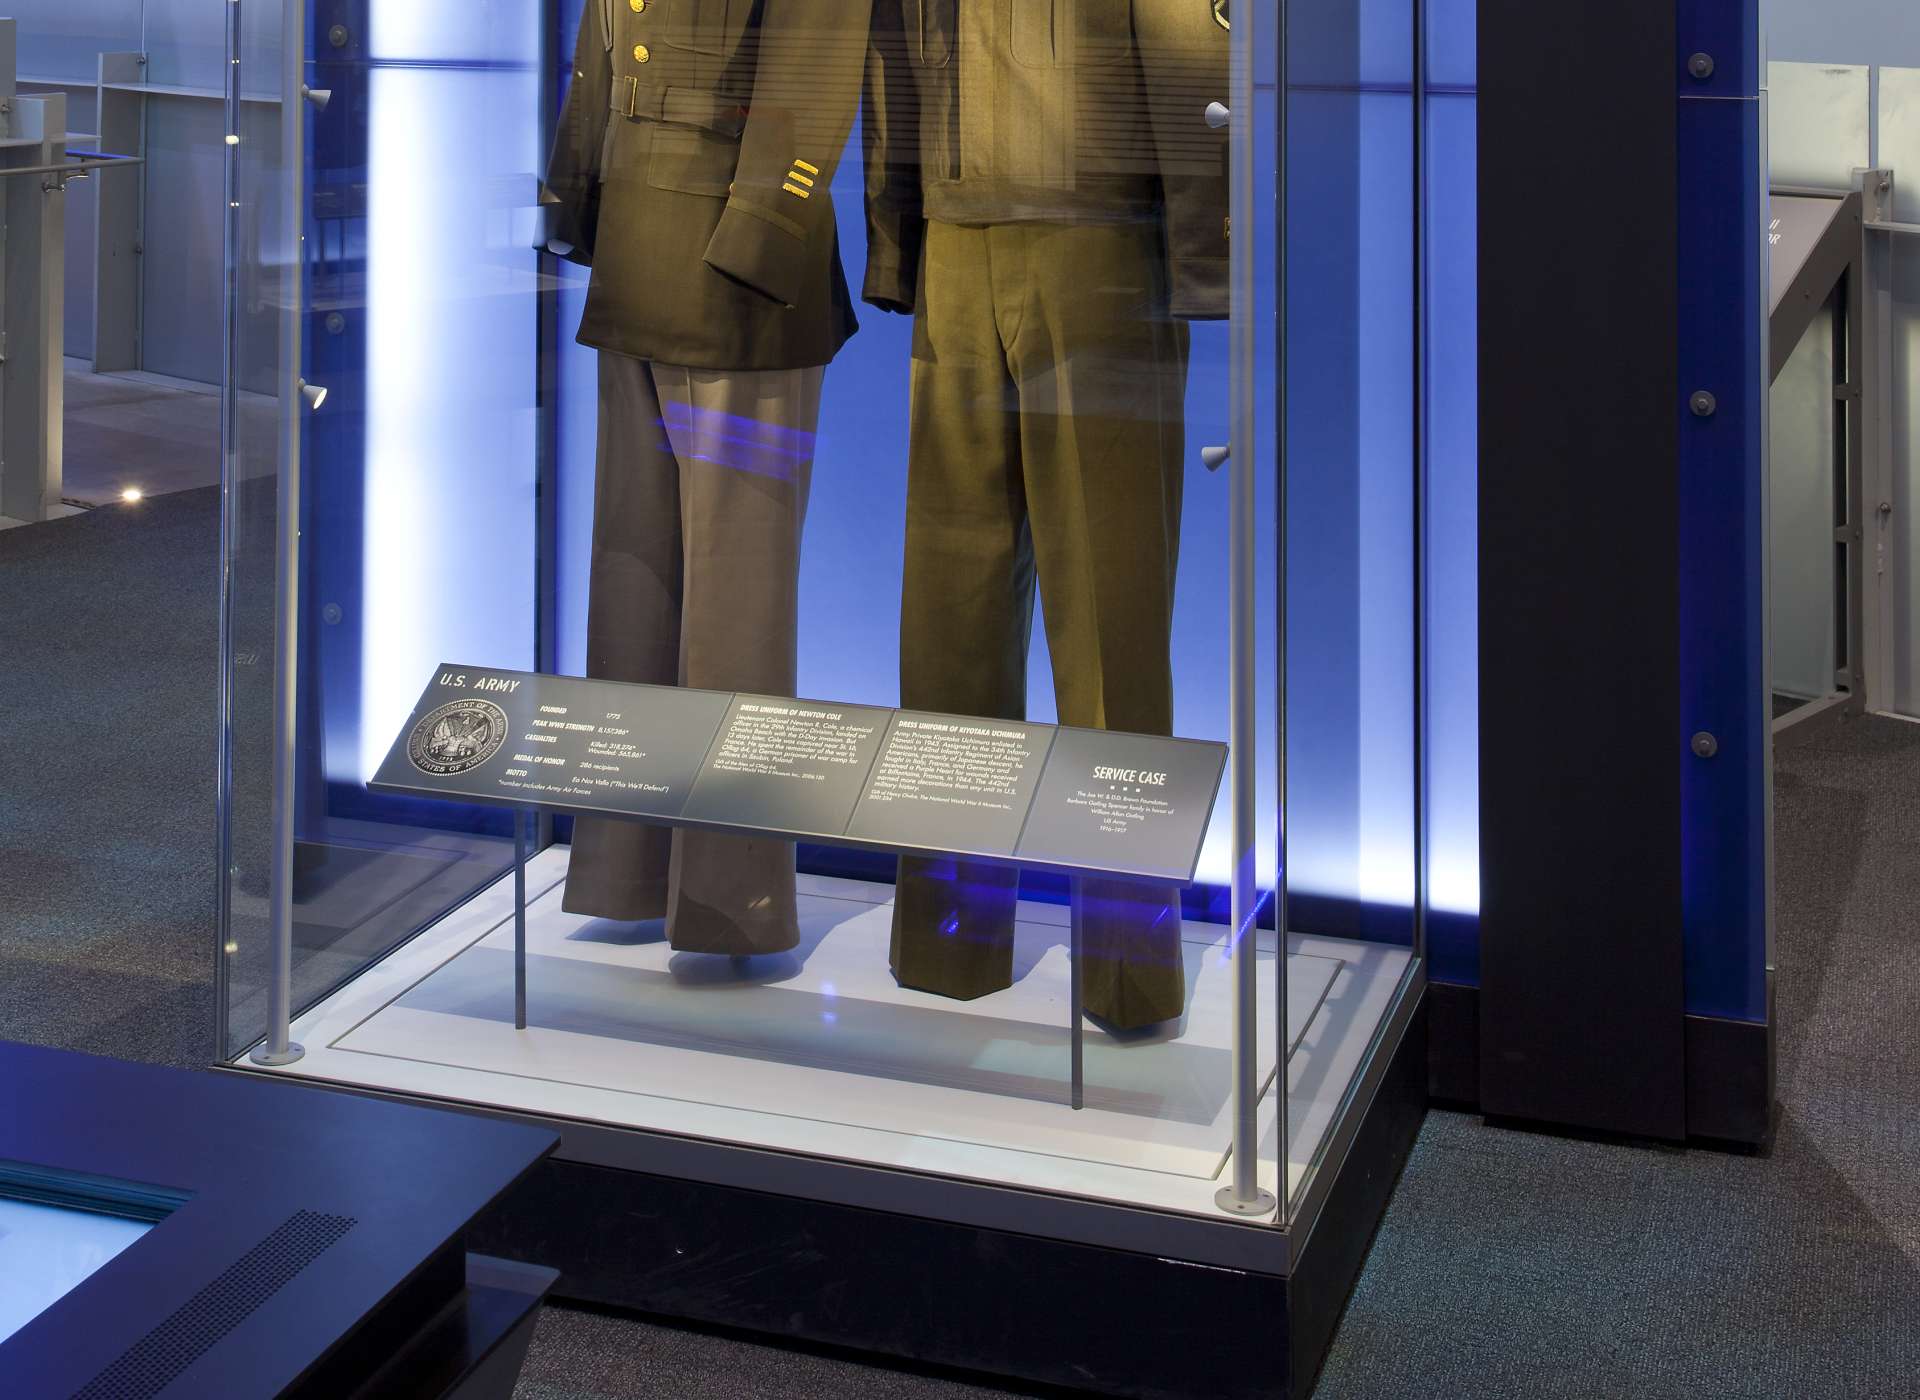 Laborde Services Gallery, US Freedom Pavilion, Army uniforms